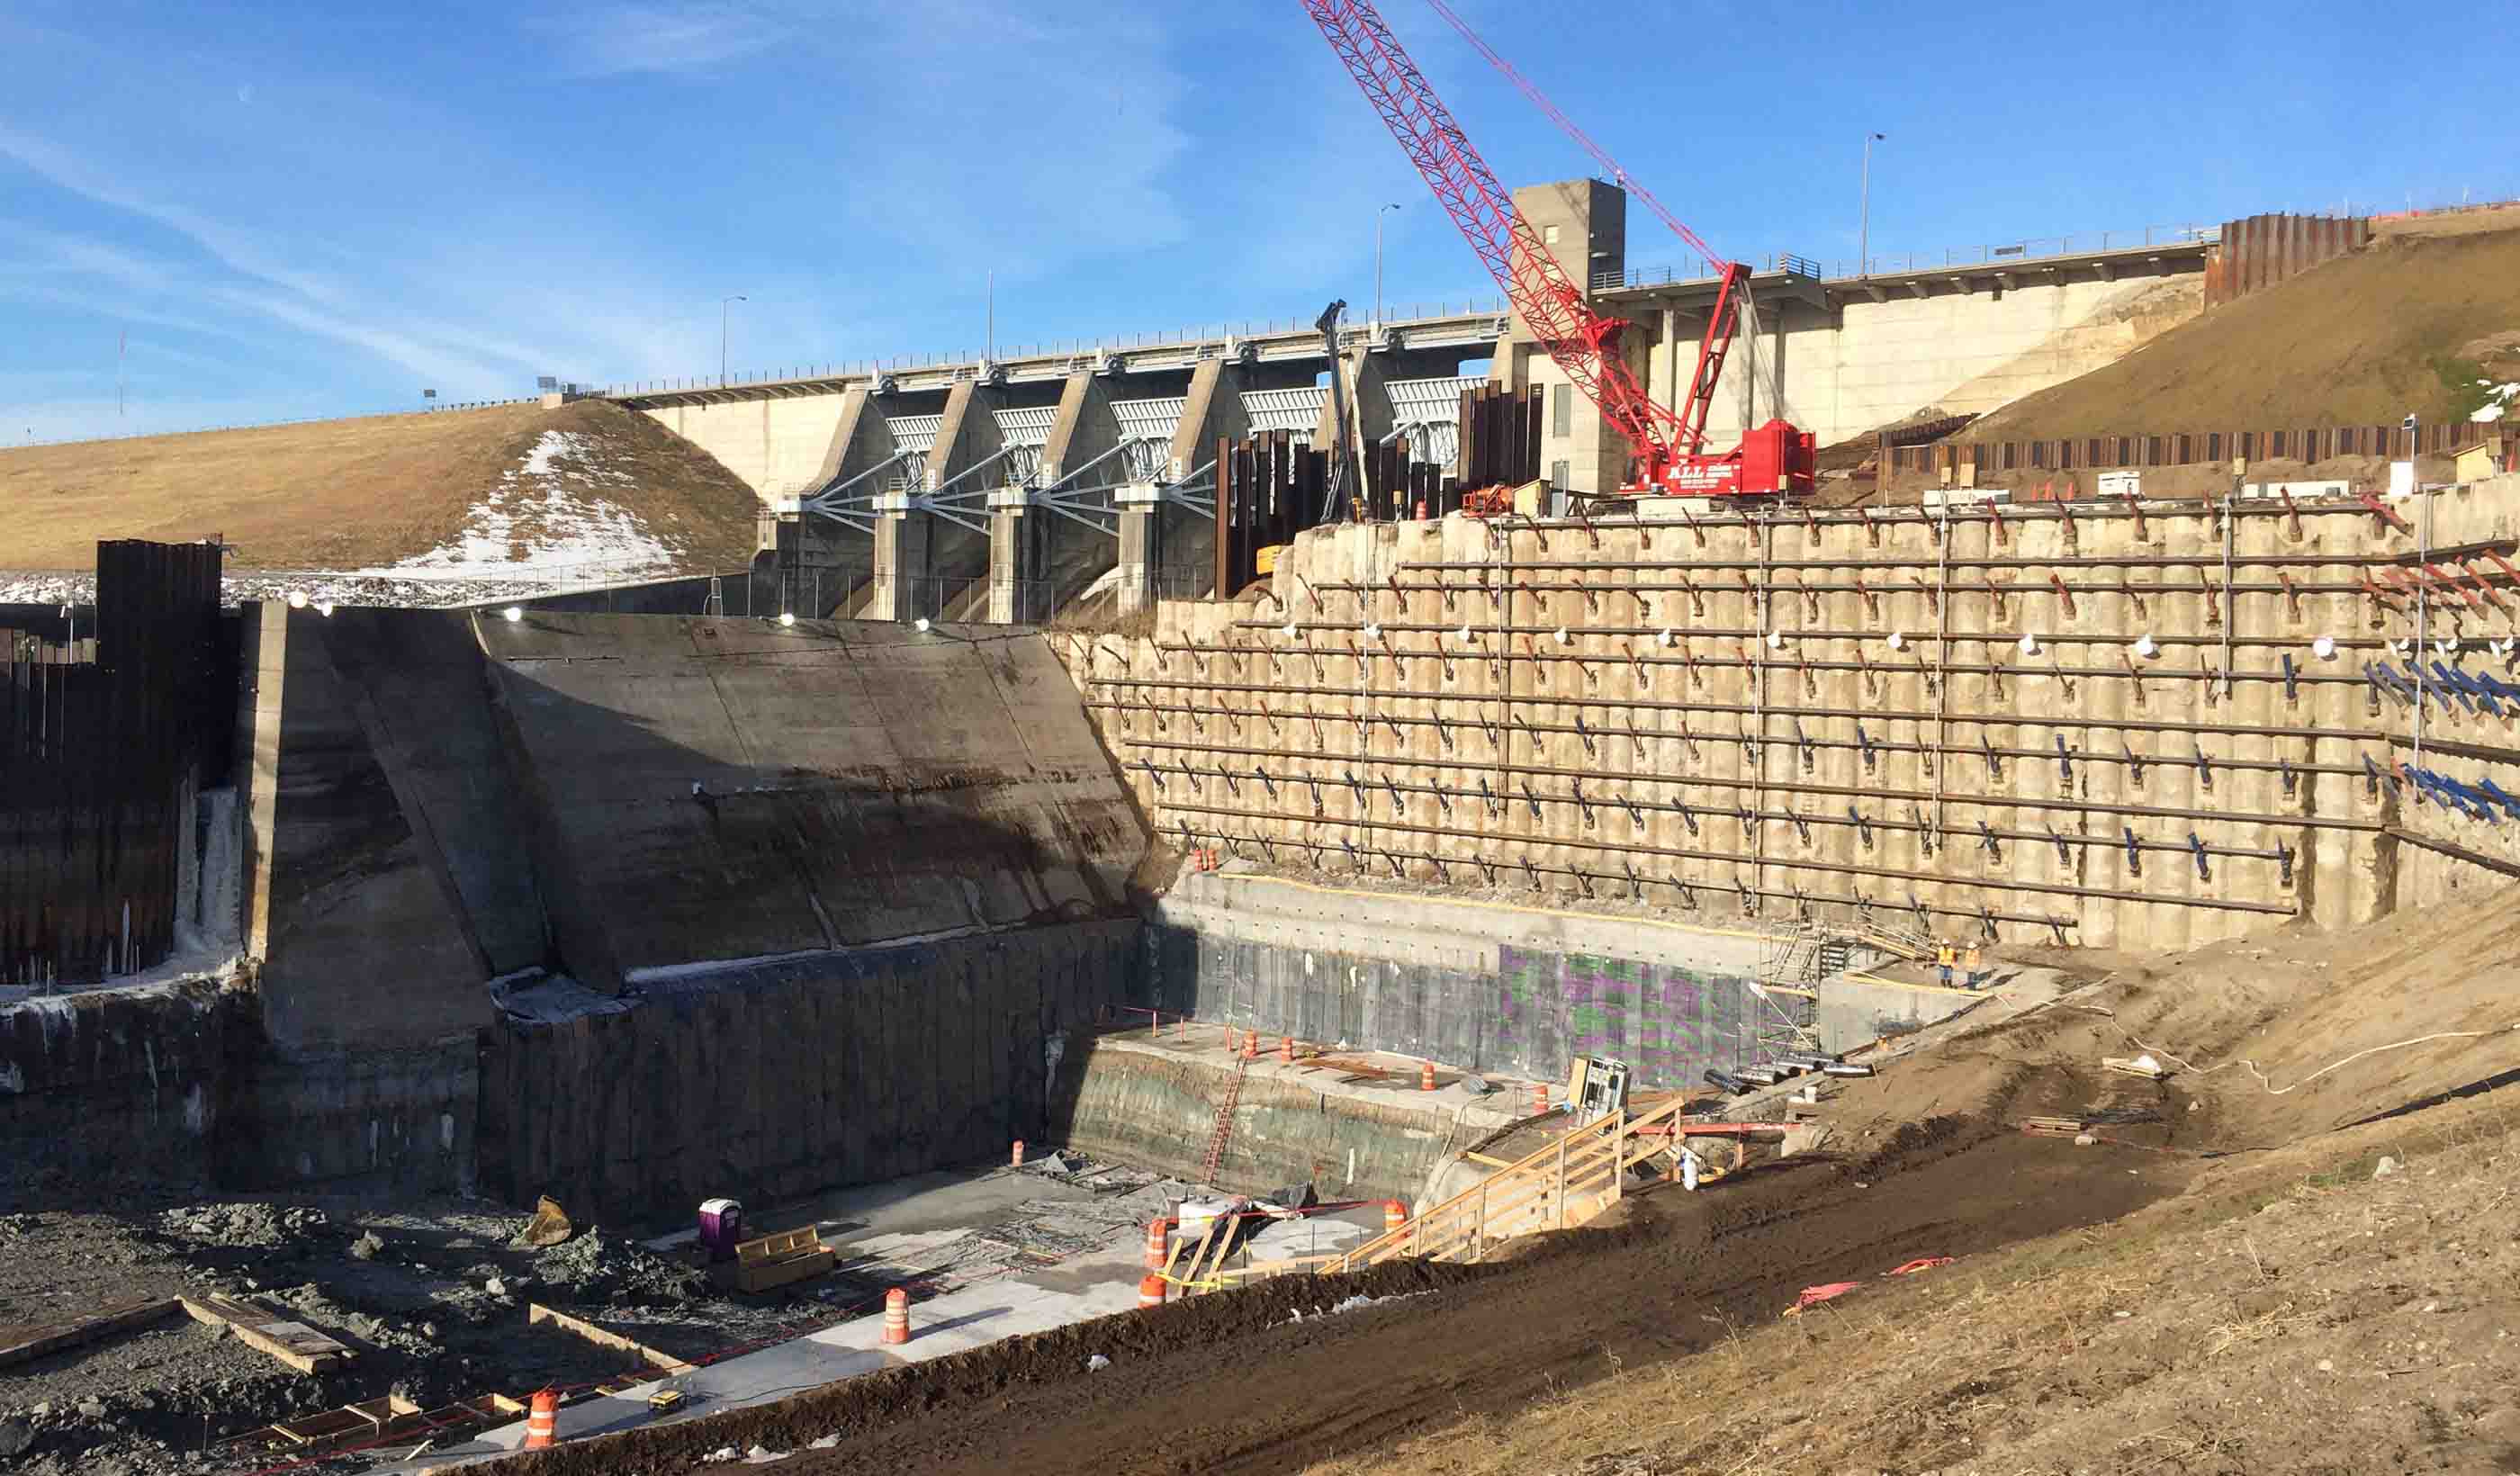 Engineers use hydropower from Red Rock Dam to generate clean and reliable electricity